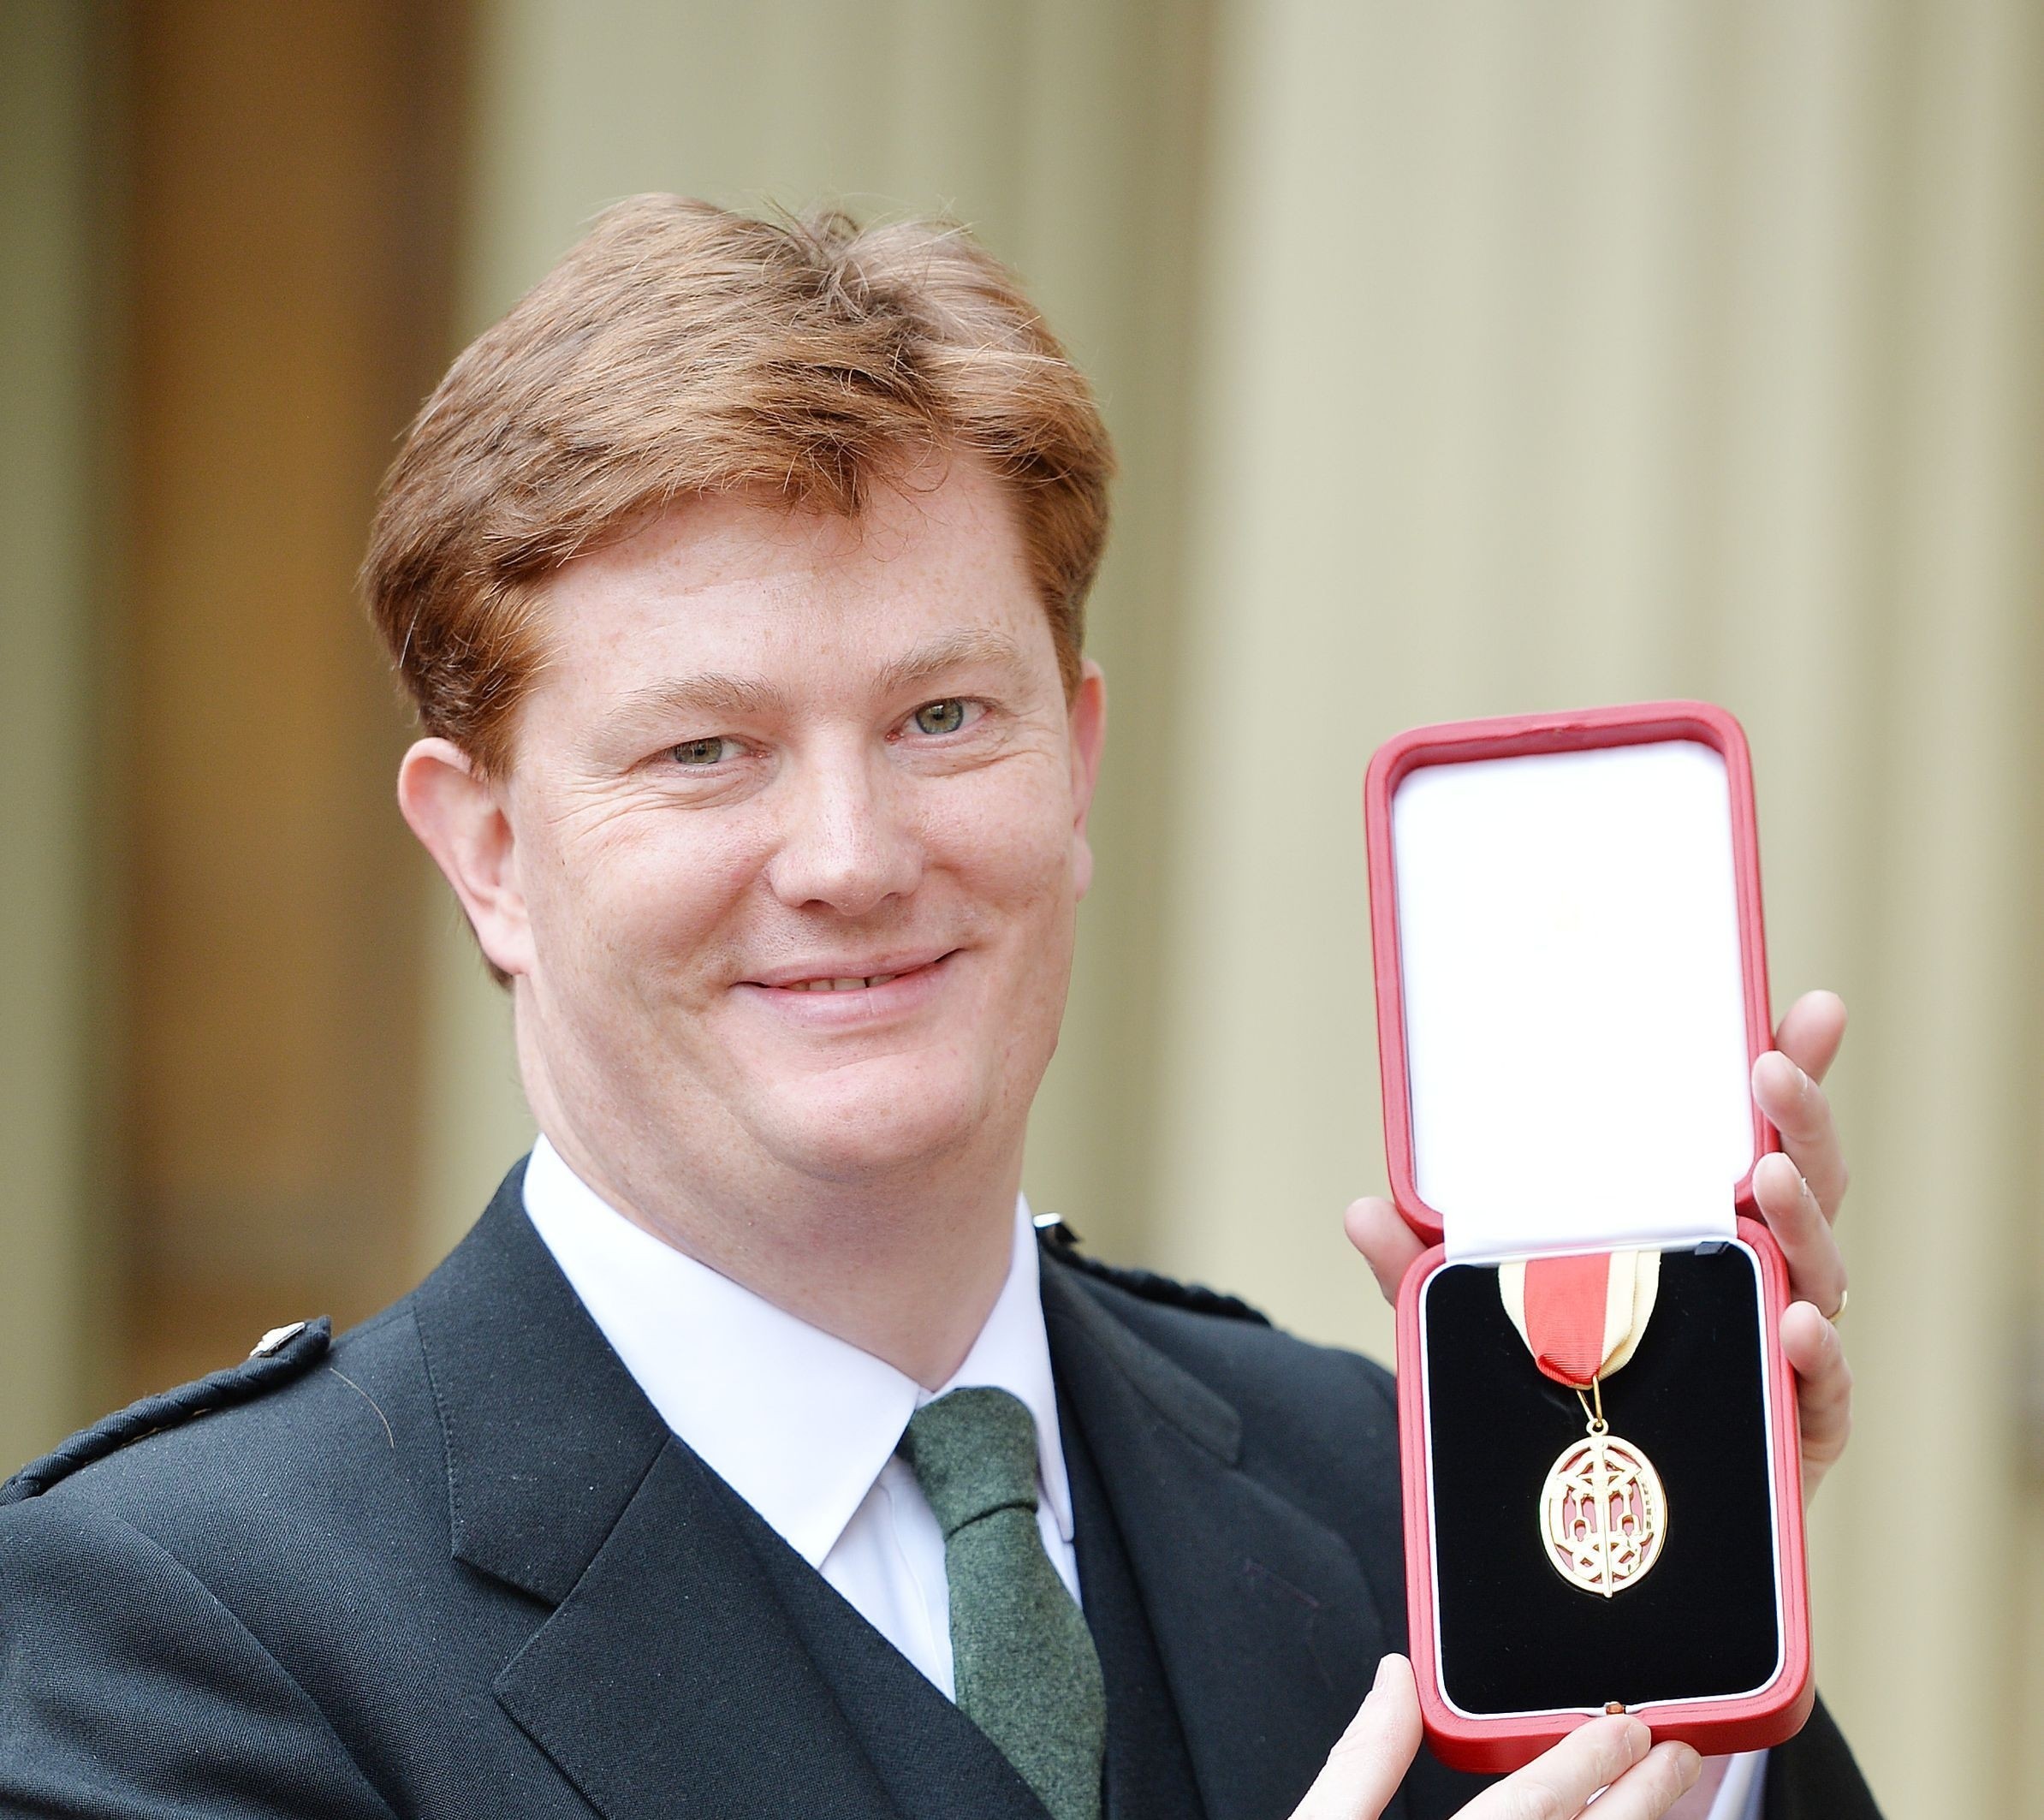 Sir Daniel Alexander holds his insignia of Knighthood which was presented by the Prince of Wales at the Investiture ceremony in Buckingham Palace,